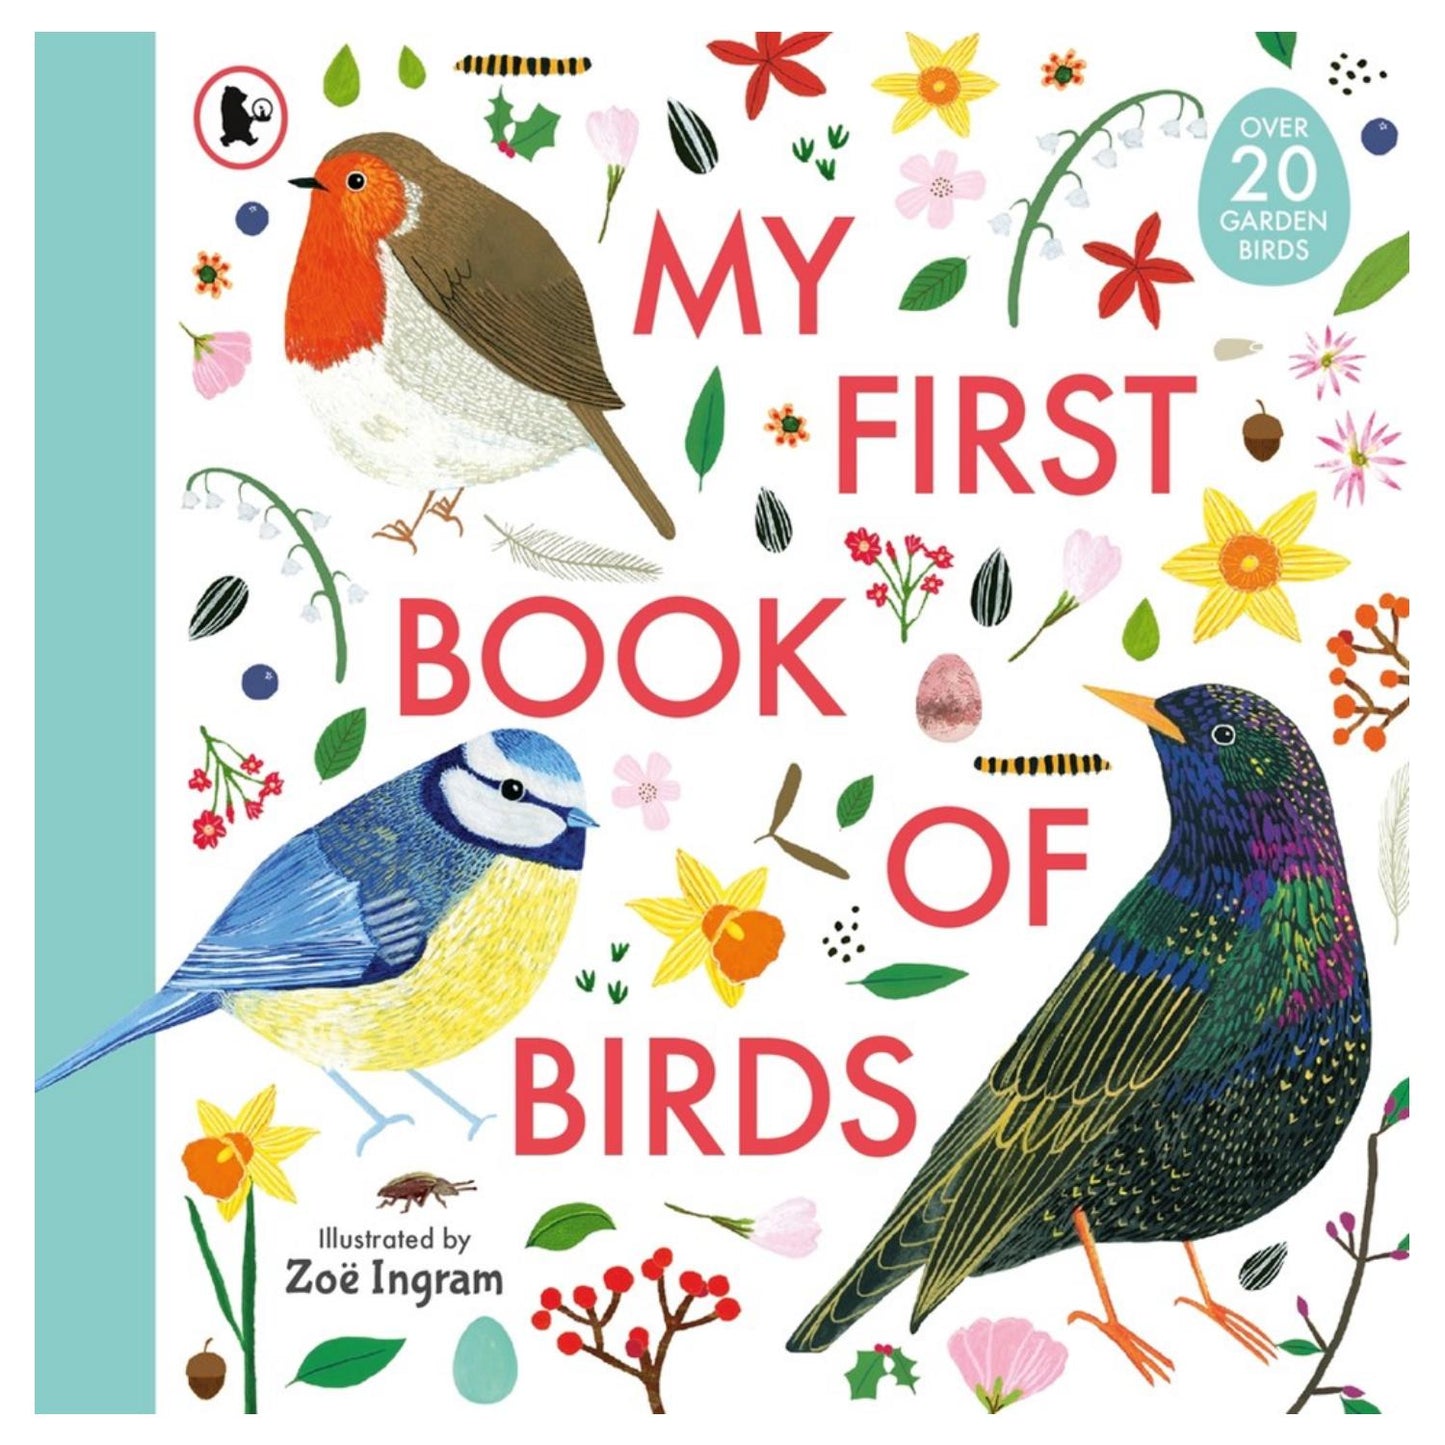 My First Book of Birds | Children’s Book on Nature